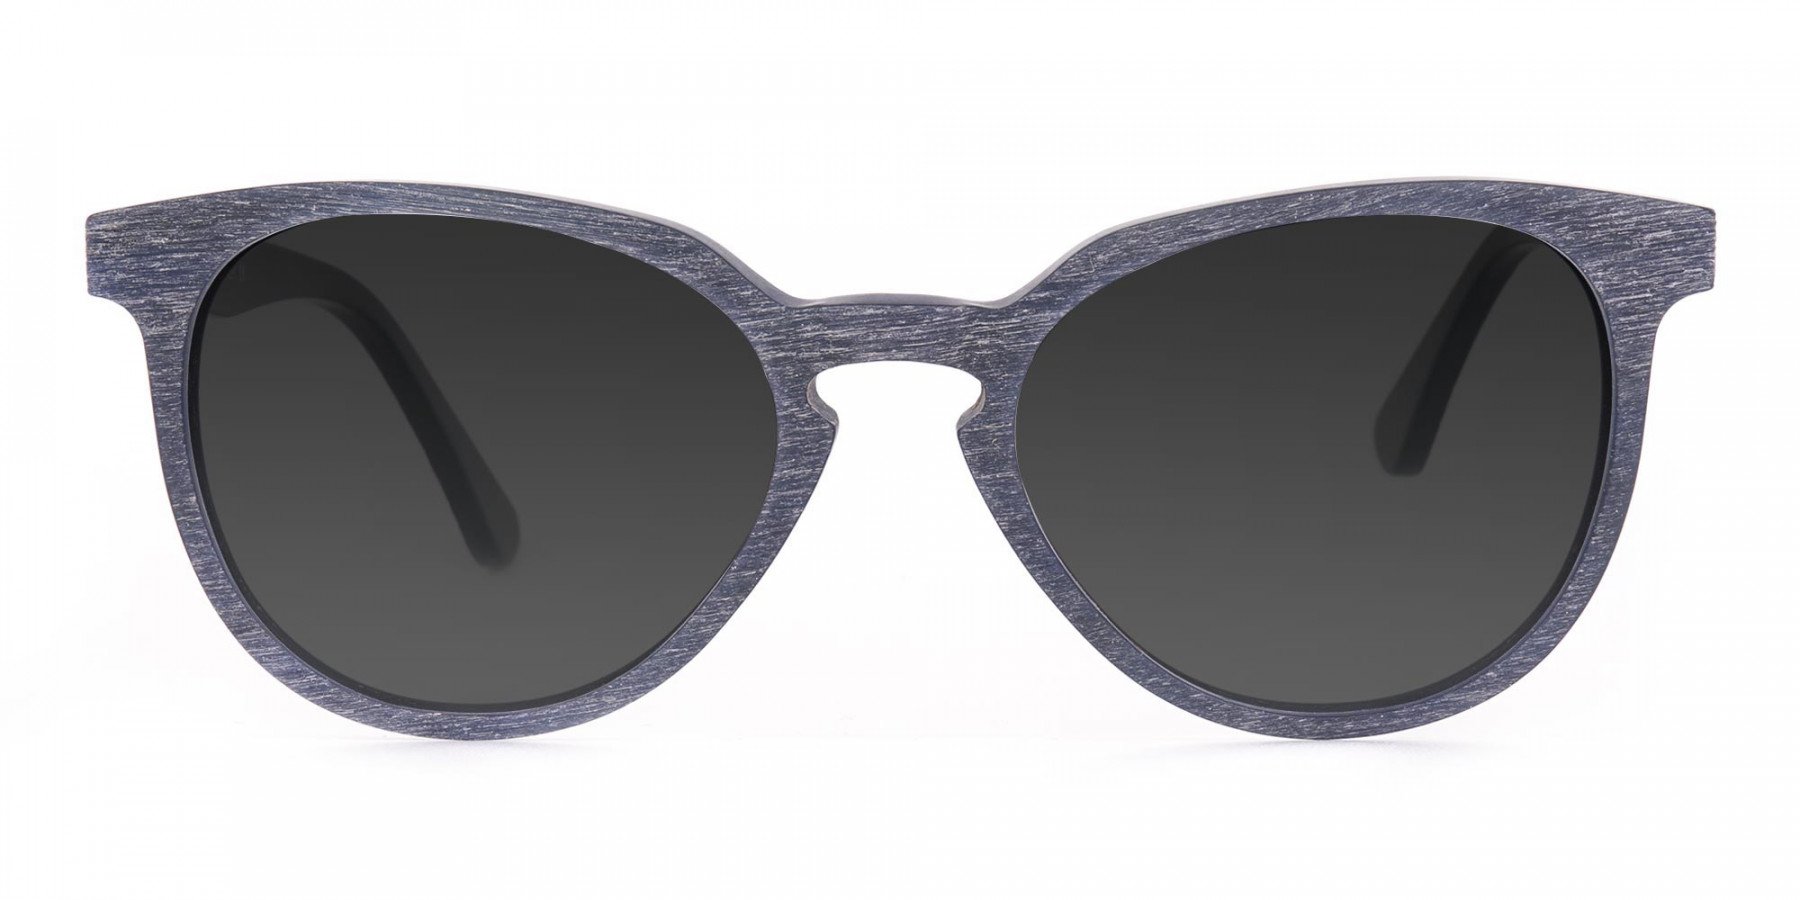 Dusty Green Wooden Sunglasses with Dark Grey Tint - 3